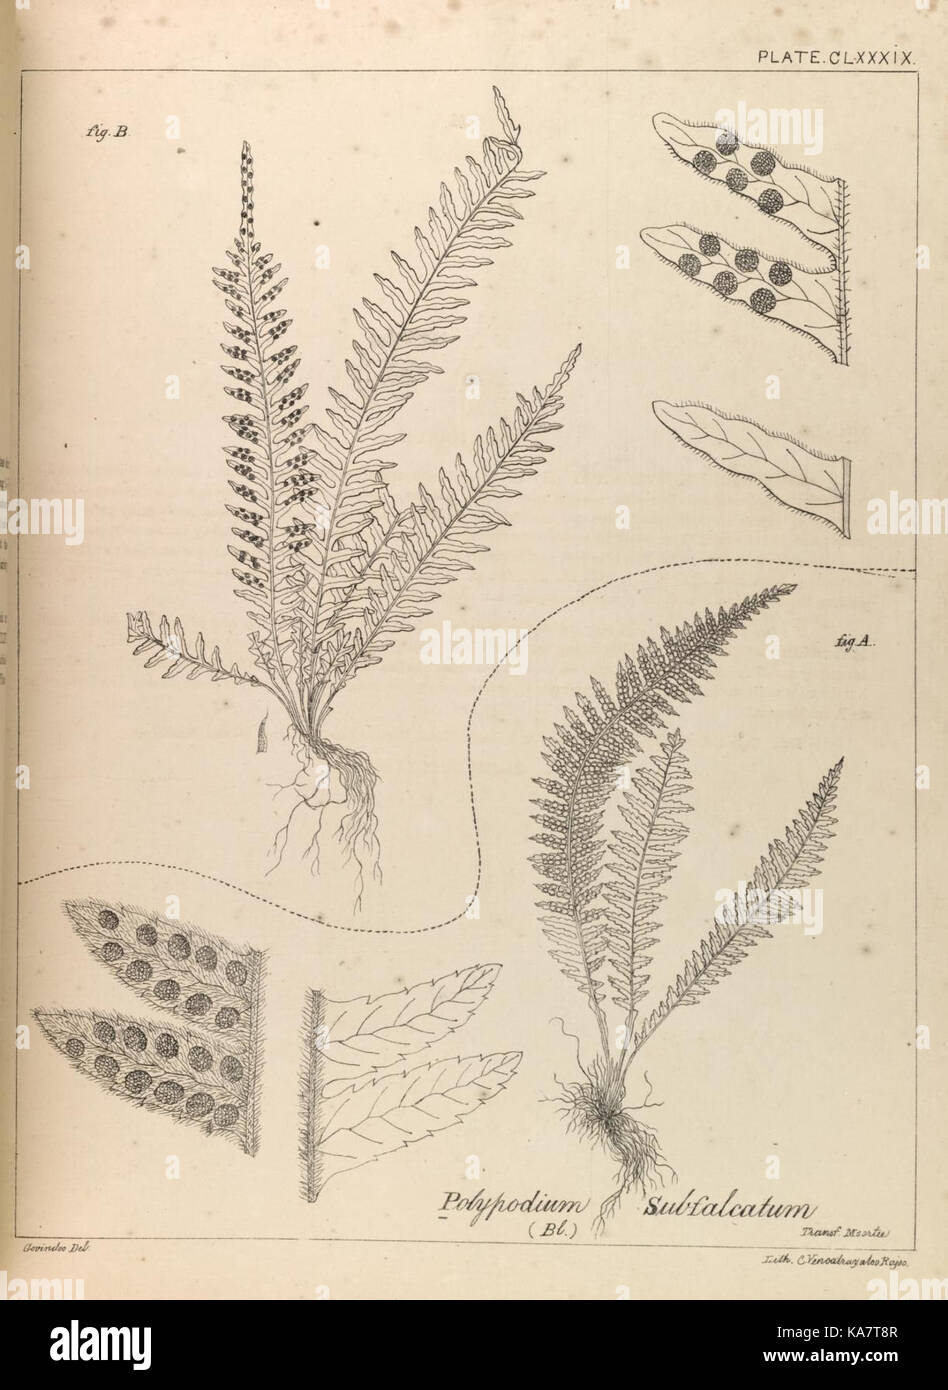 The ferns of British India (PLATE CLXXXIX) (8530404551) Stock Photo